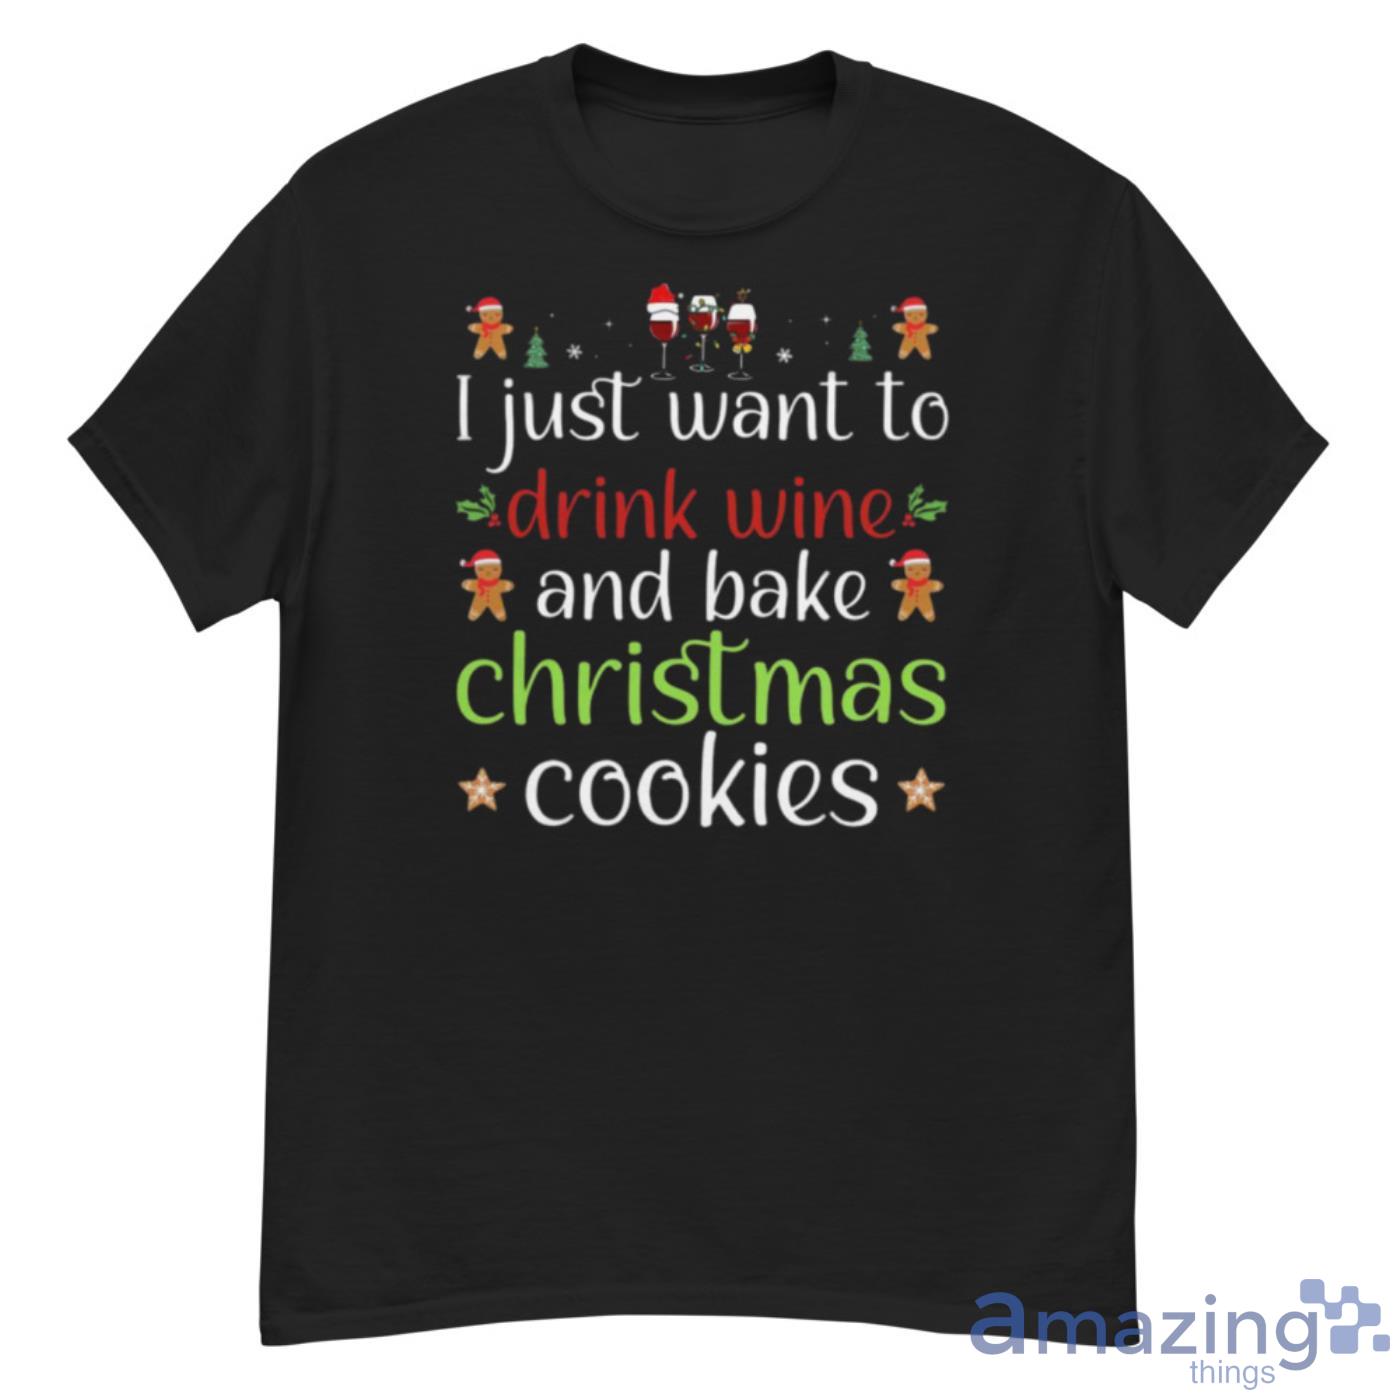 I Just Want To Drink Wine And Bake Christmas Cookies Shirt - G500 Men’s Classic T-Shirt